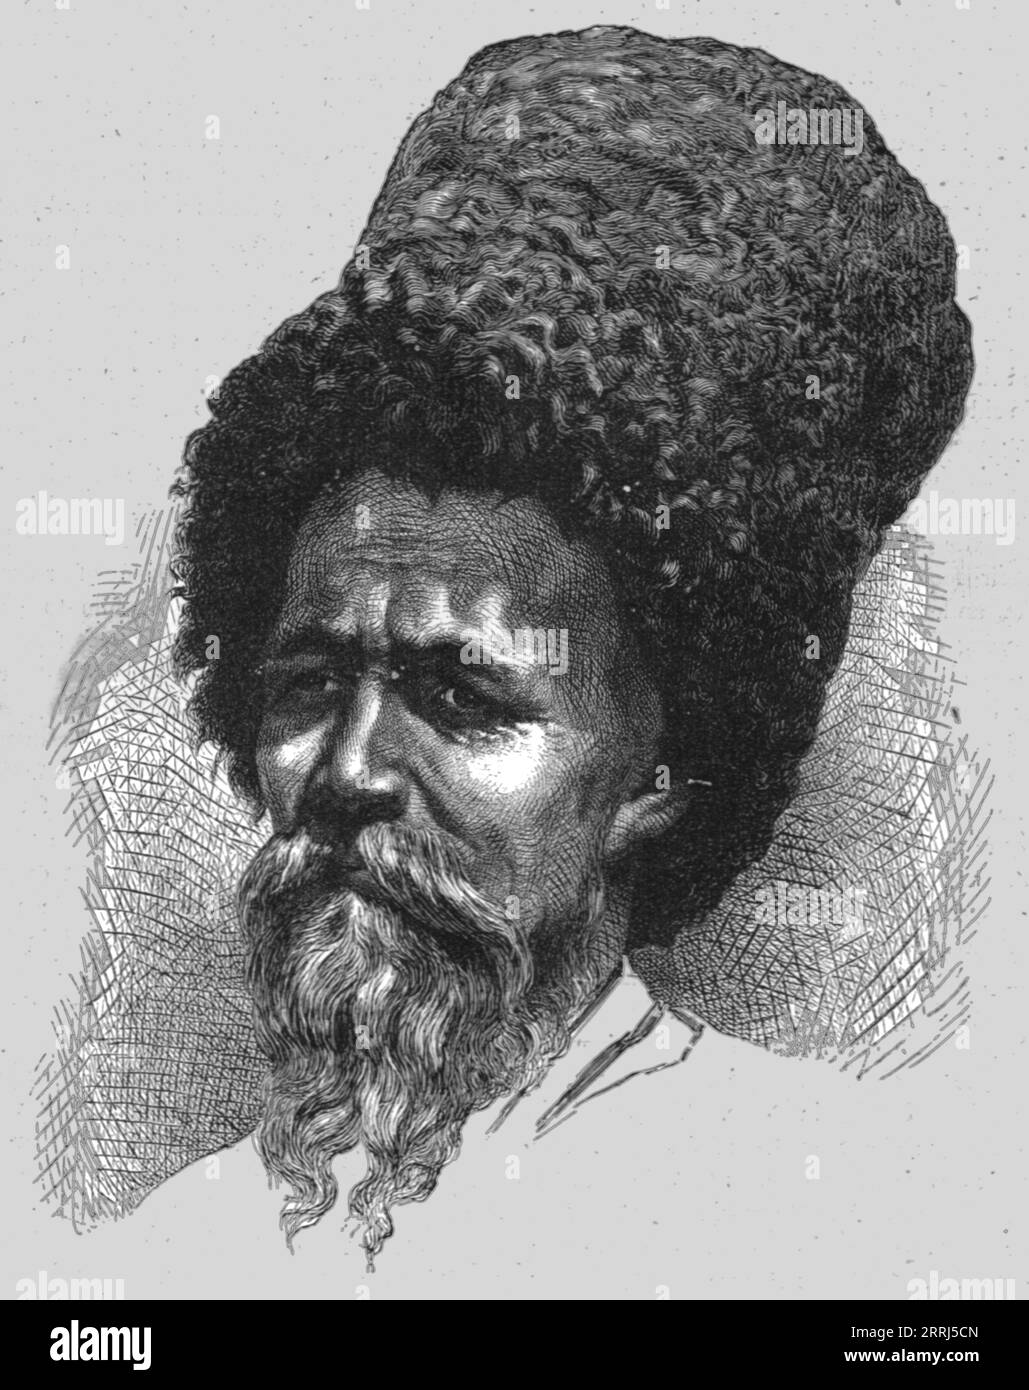 'Cossack; The Caucasus', 1875. From, 'Illustrated Travels' by H.W. Bates. [Cassell, Petter, and Galpin, c1880, London] Stock Photo